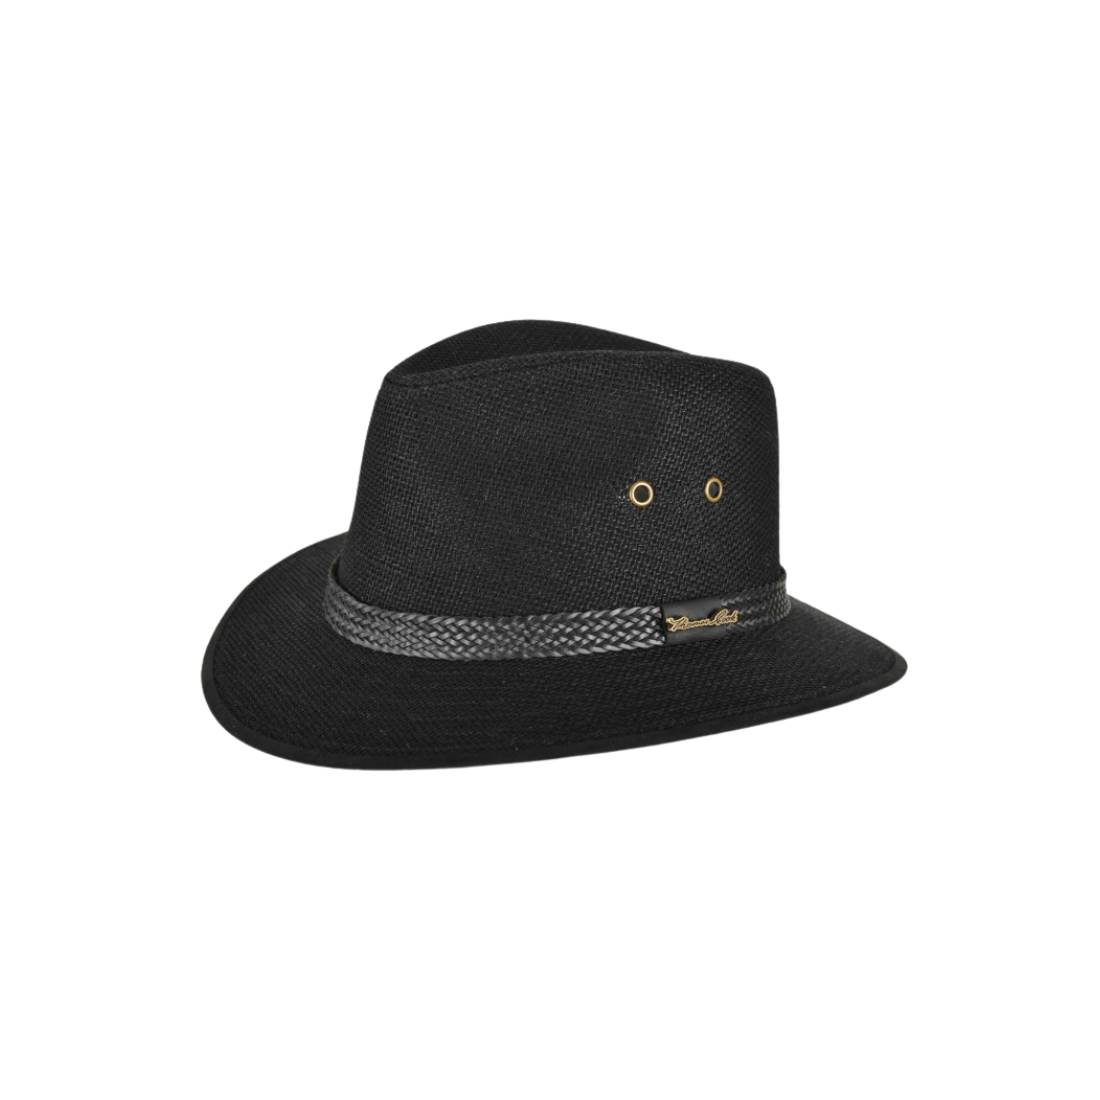 Broome Hat Brown Lar XL Black Mens Hats, Scarves, Beanies by Thomas Cook | The Bloke Shop